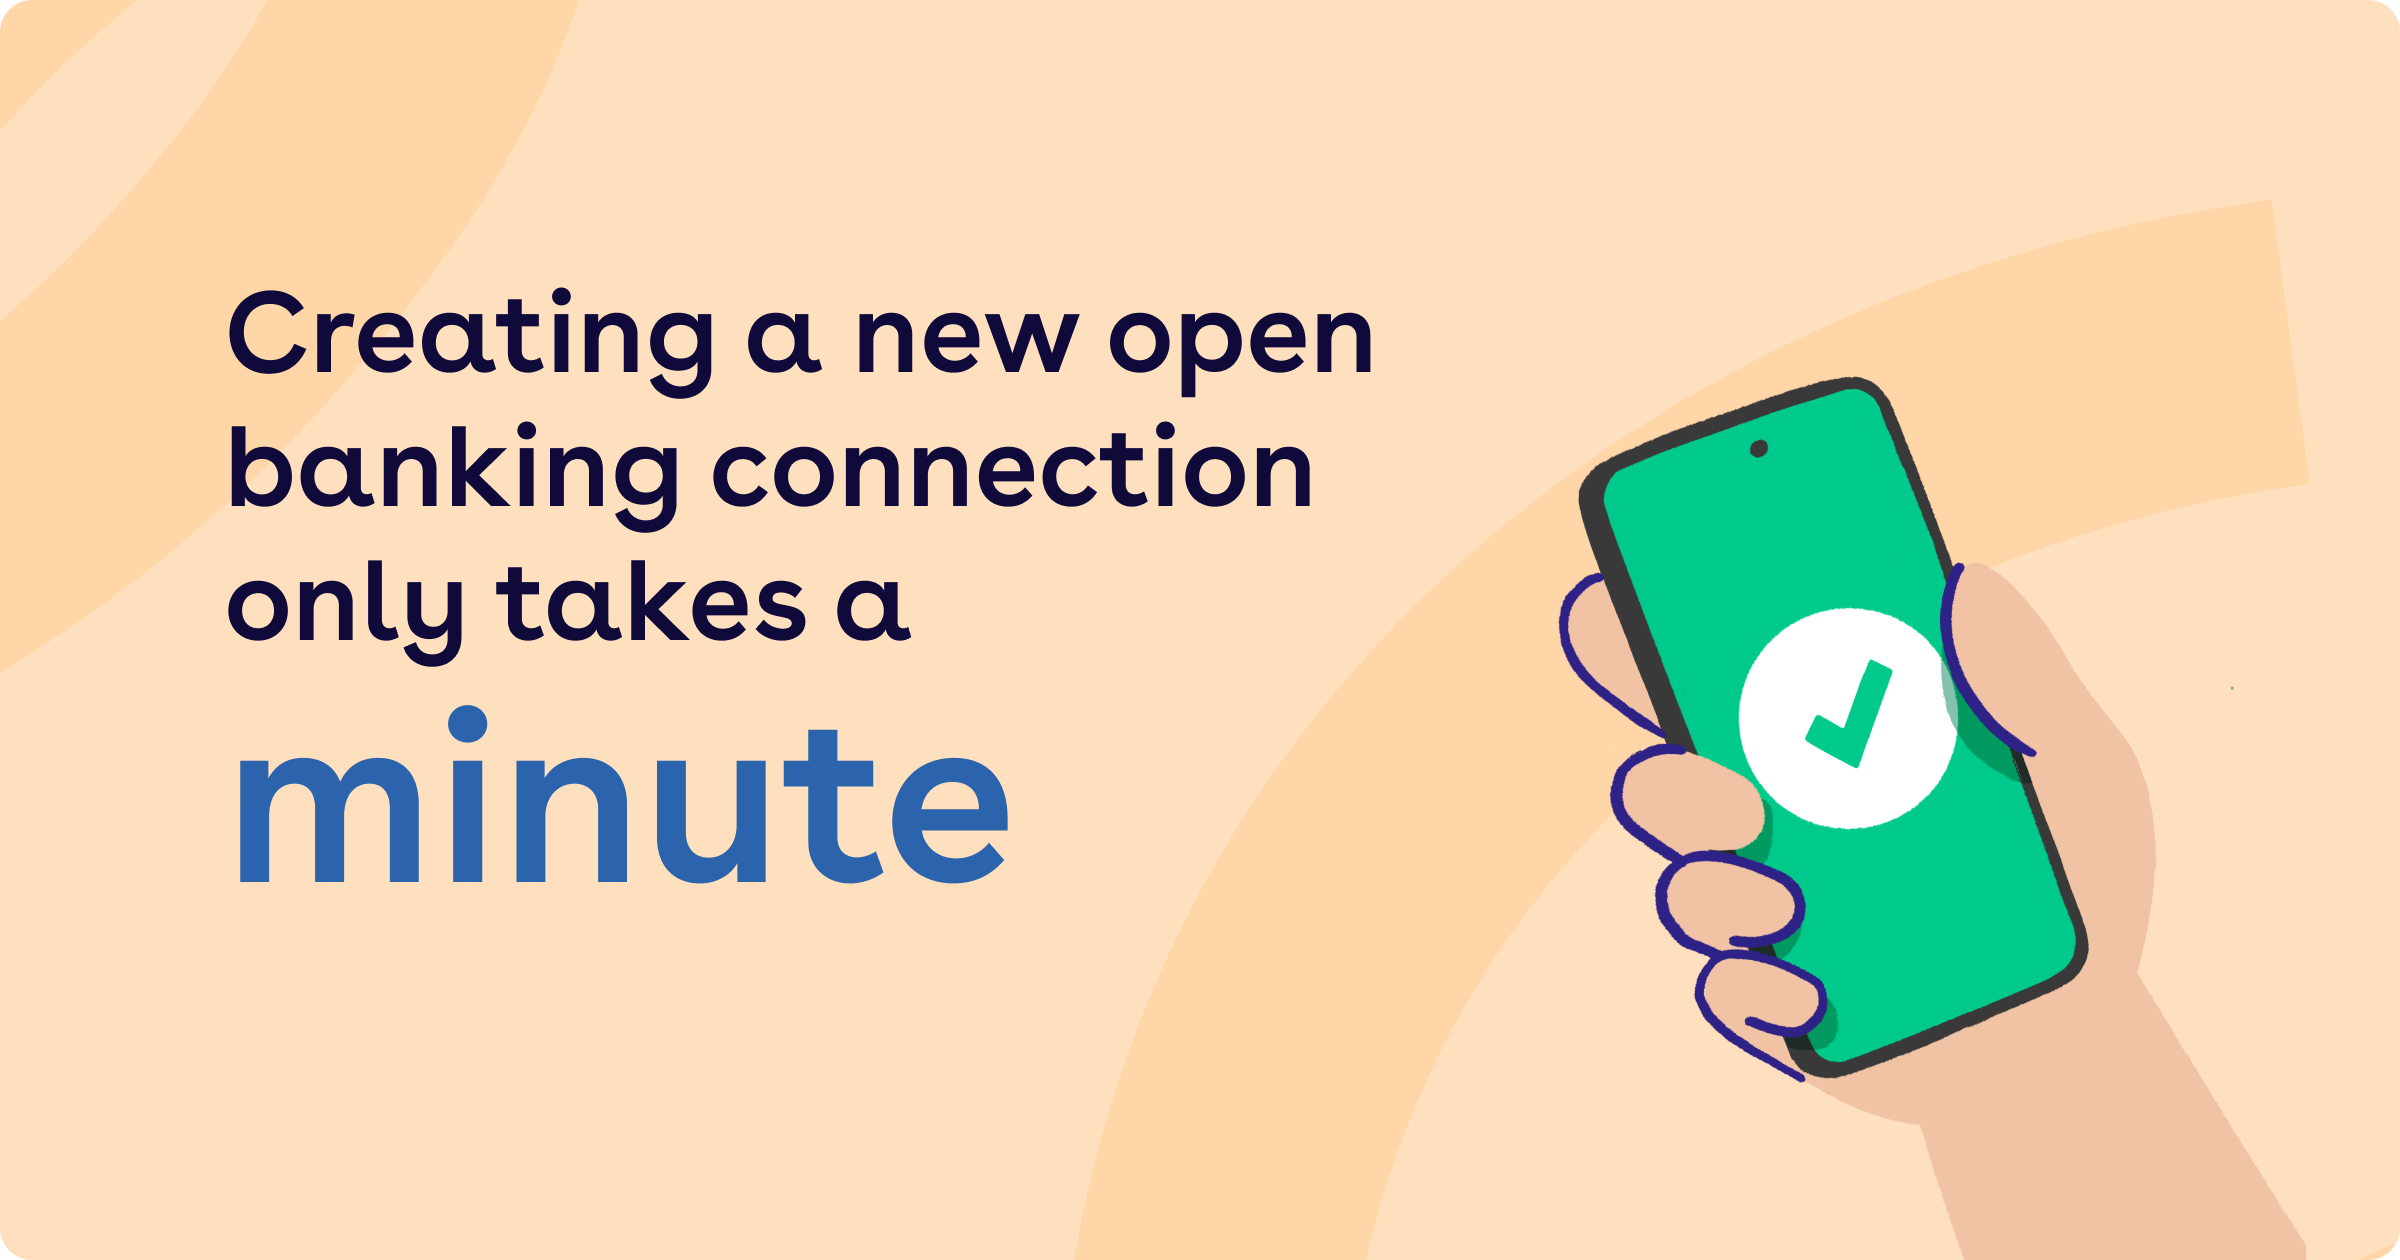 Creating a new open banking connection only takes a minute